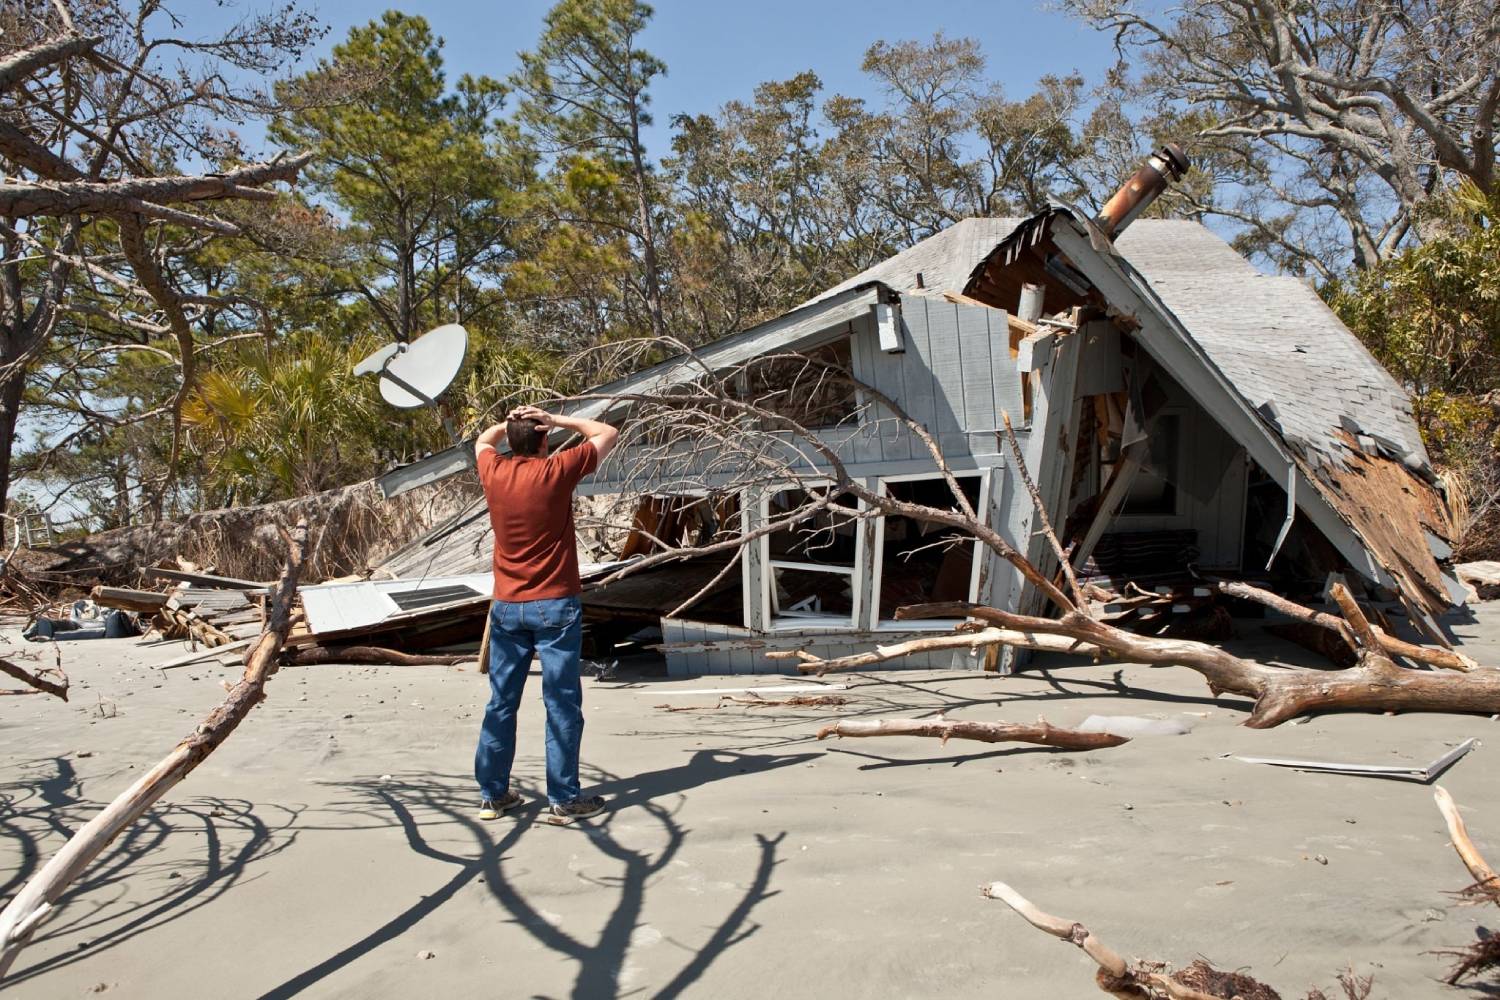 What immediate actions should you take after suffering hurricane damage to your insured home to aid in your insurance claim?